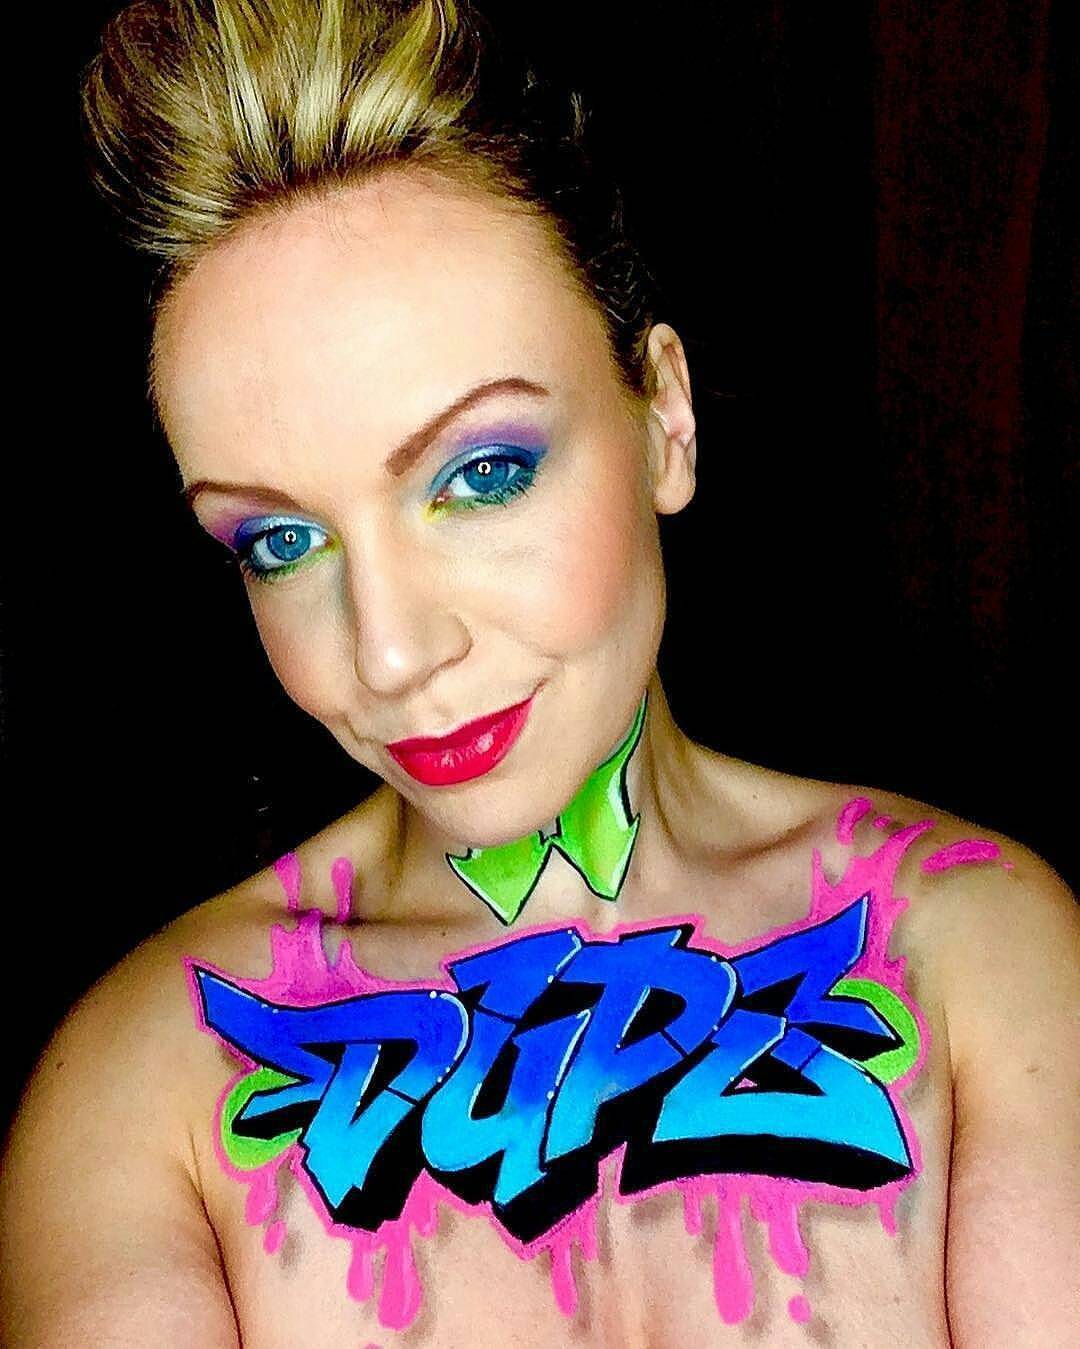 <p>Day 12 - Graffiti! What can we say @zoe_artistsharvest - simply phenomenal! We love love LOVE this #Dupe tribute to pieces! 😍😍 #31daysoffaceartchallenge  #31daysoffaceart  #specialeffects #specialFxMakeup #specialEffectsMakeup #SpecialFx  #dupemag #sfxmakeup #sfxmakeupartist  #feature_my_stuff #mua #muastars #bodypainting #graffitimakeup #tagging</p>